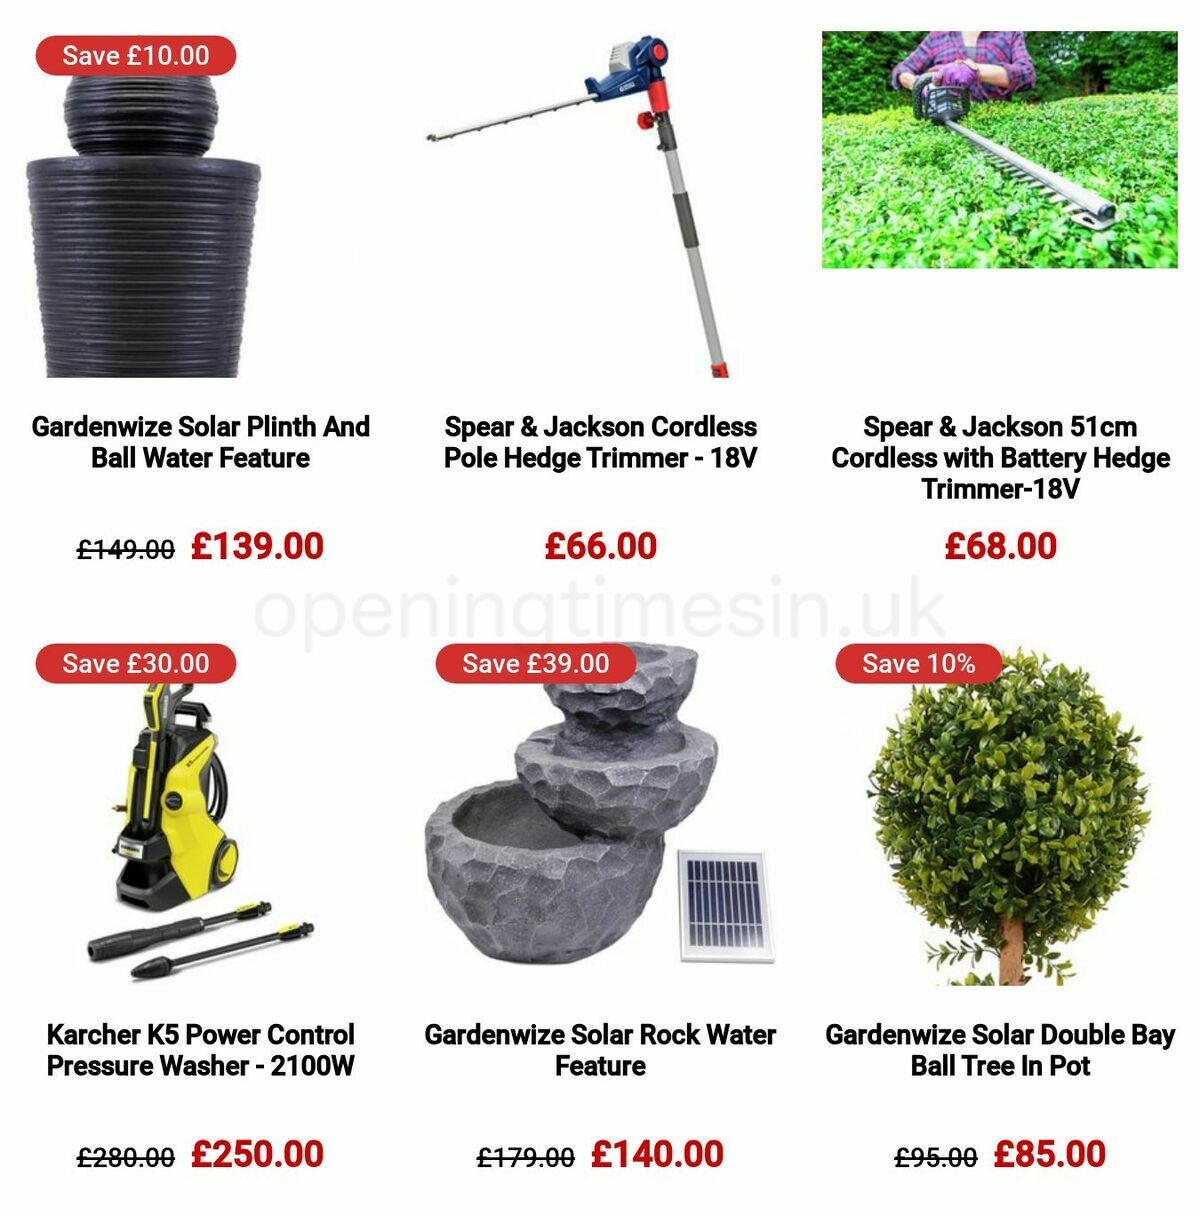 Argos Offers from 25 April